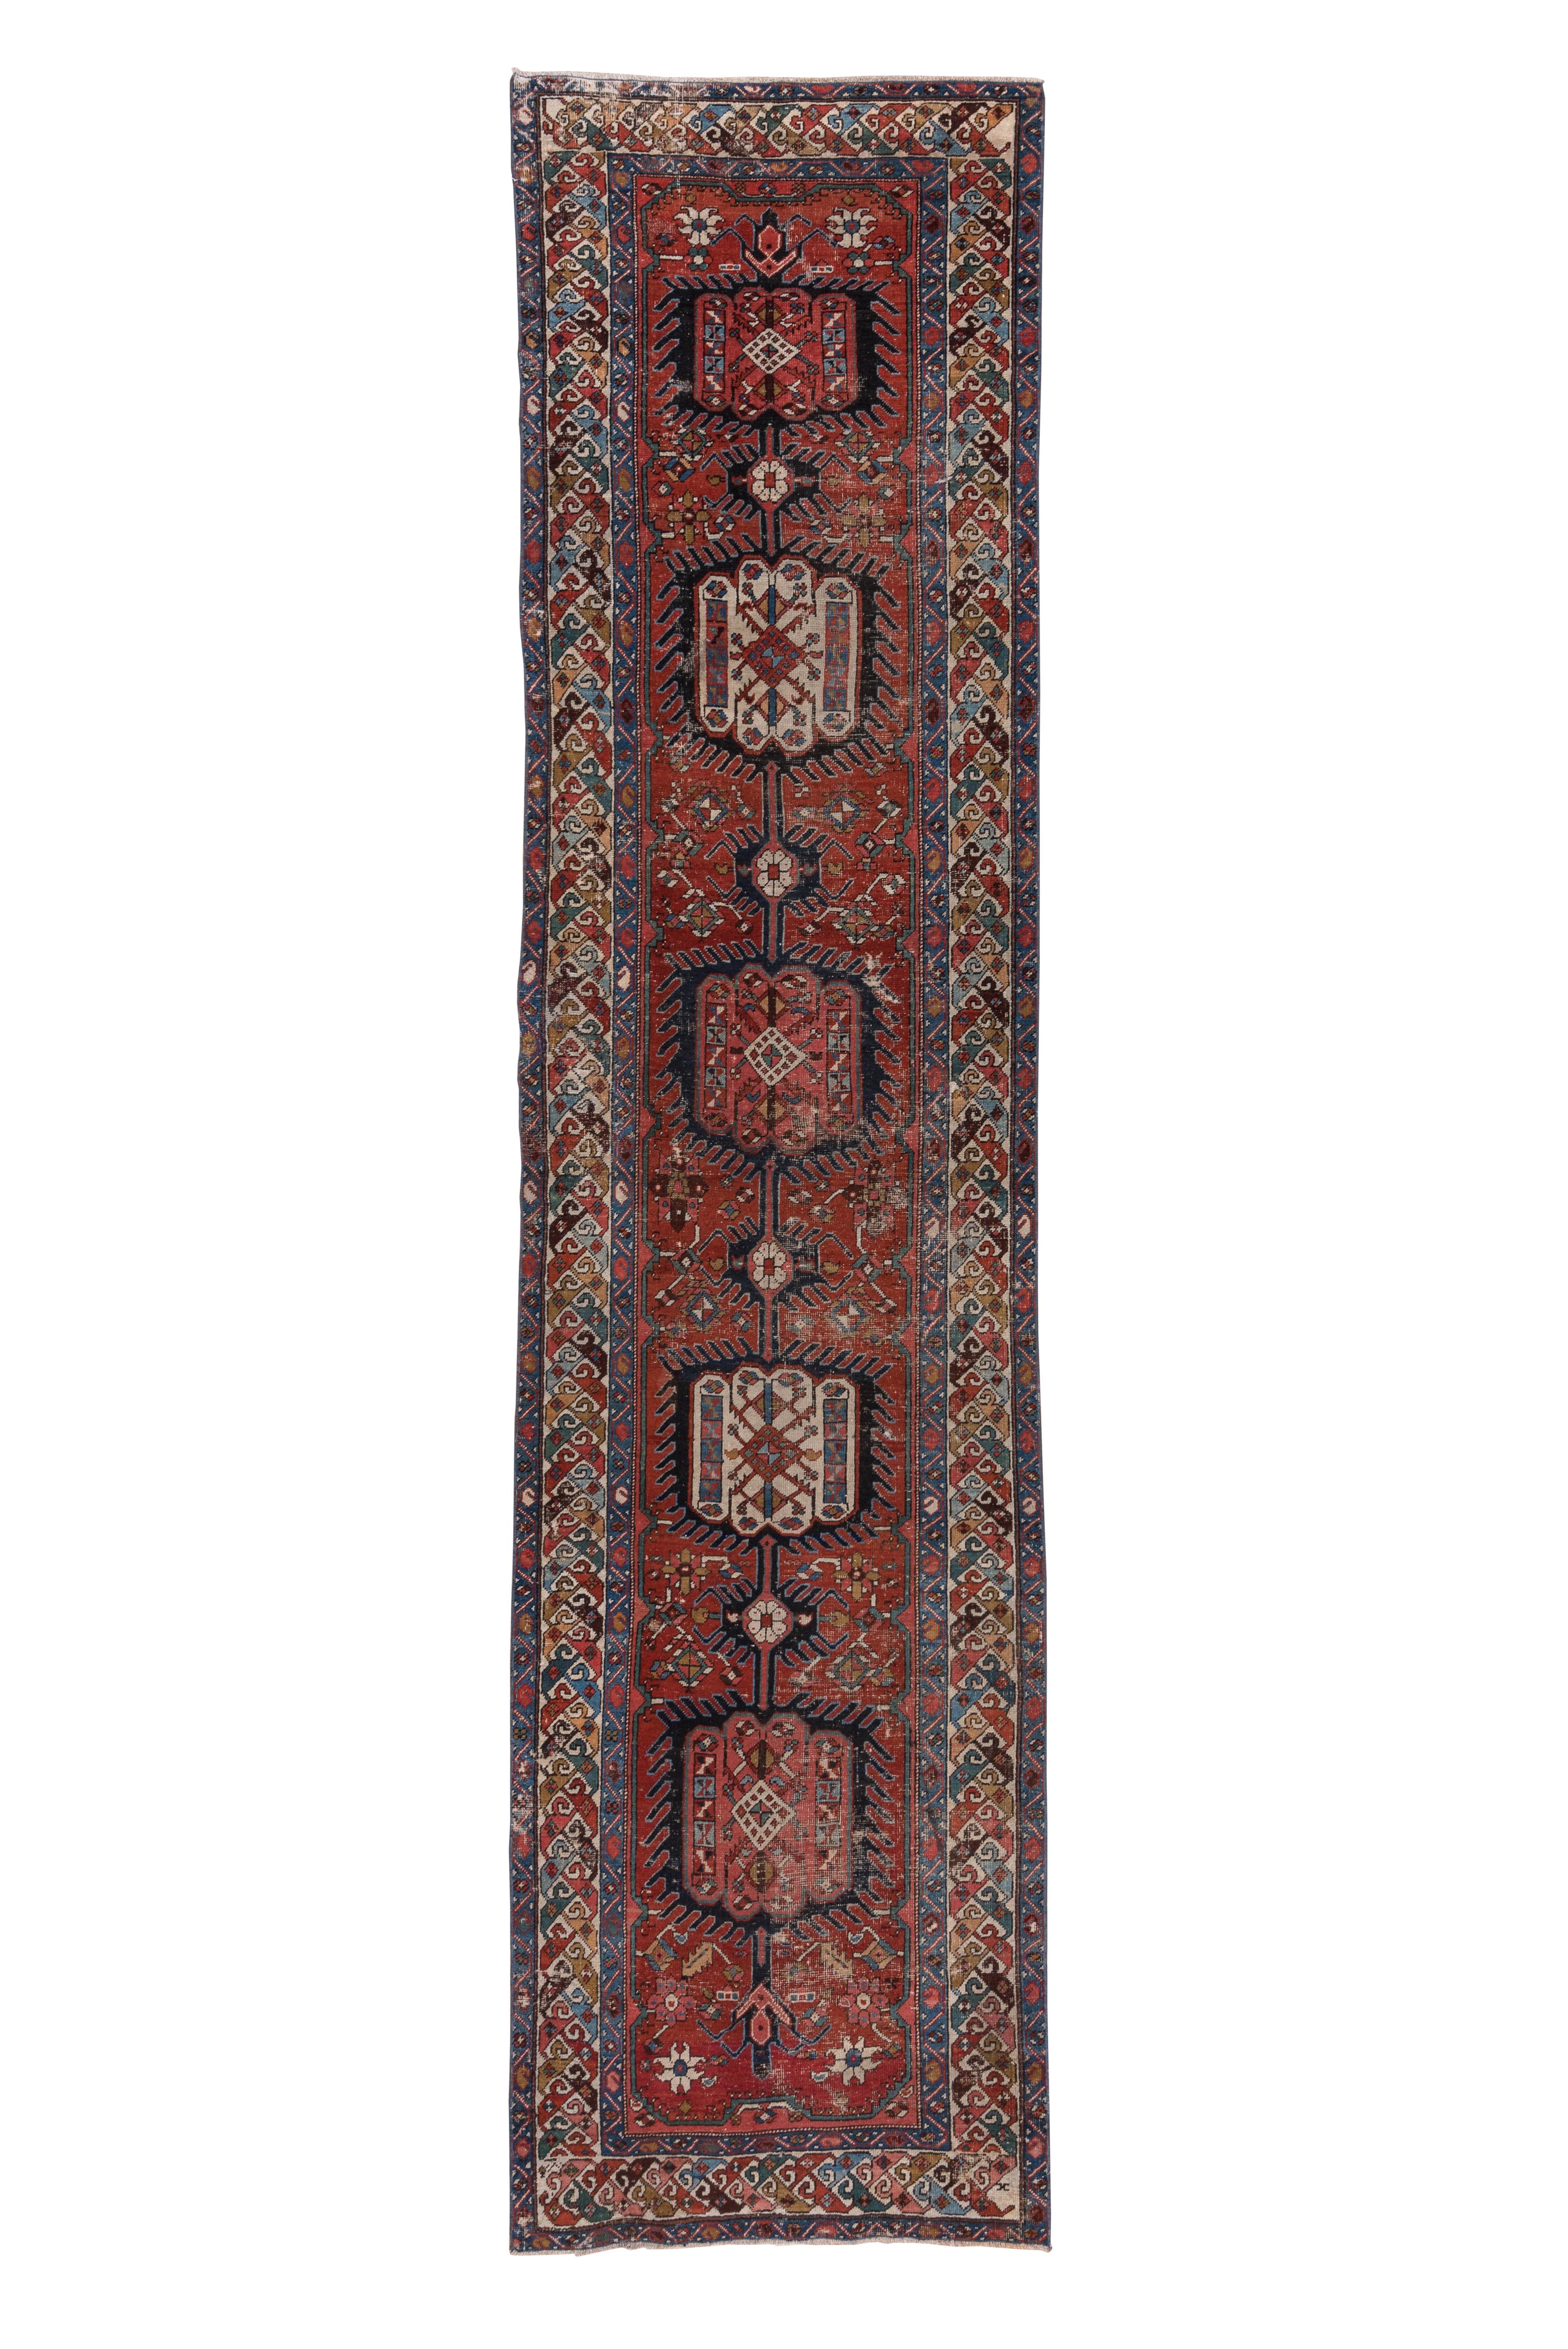 Of superior Serapi grade, this NW Persian village kenare shows a natural, madder red field centred by a five section pole medallion. Each rounded cartouche-like segment has a finger fringe surrounding it and is accented in ecru and buff-camel. Small